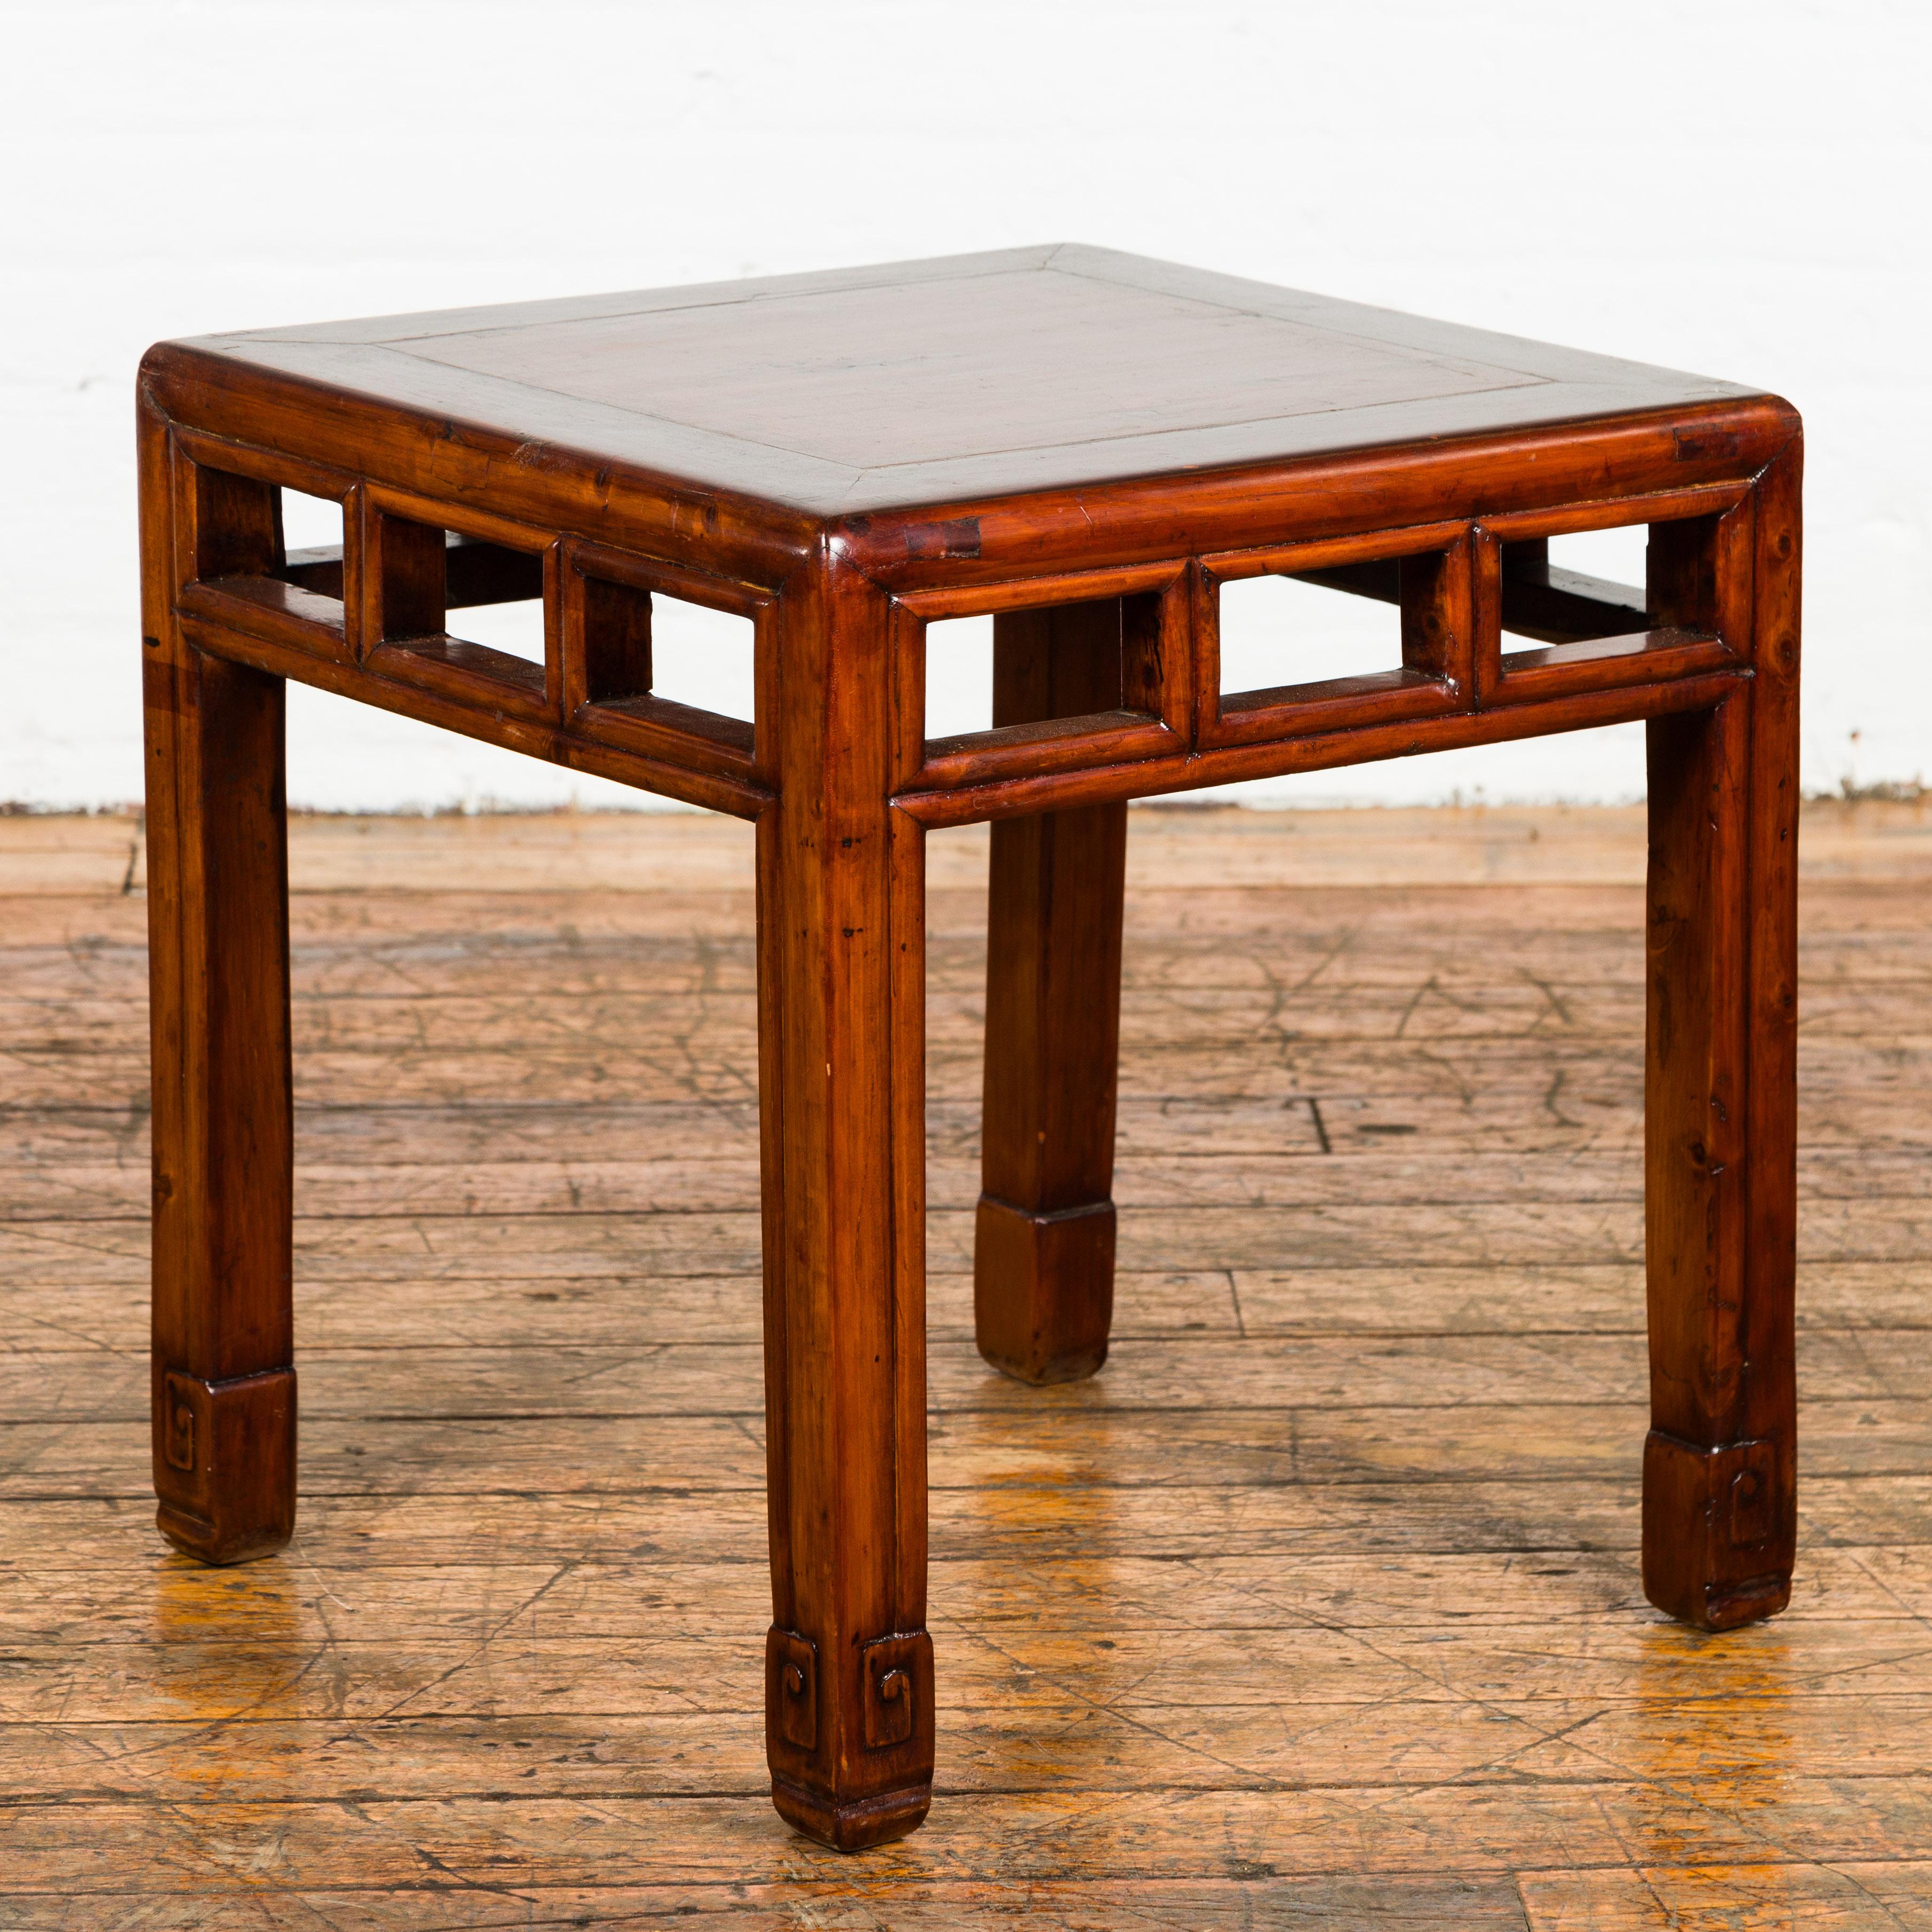 Chinese Late Qing Dynasty Small Side Table with Pillar Strut Motifs and Scrolling Feet For Sale